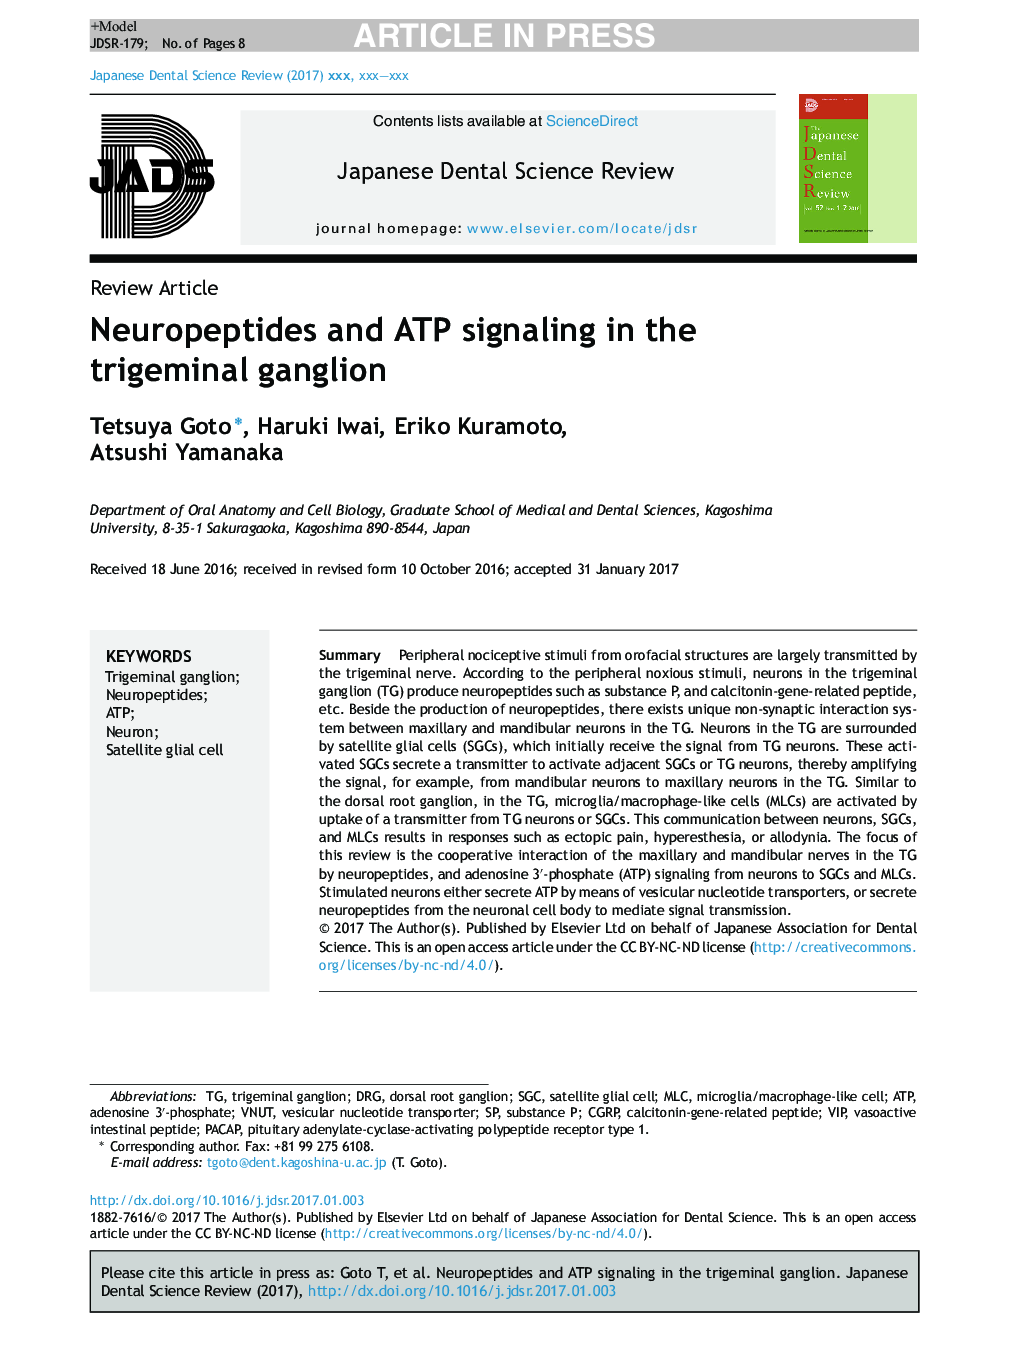 Neuropeptides and ATP signaling in the trigeminal ganglion